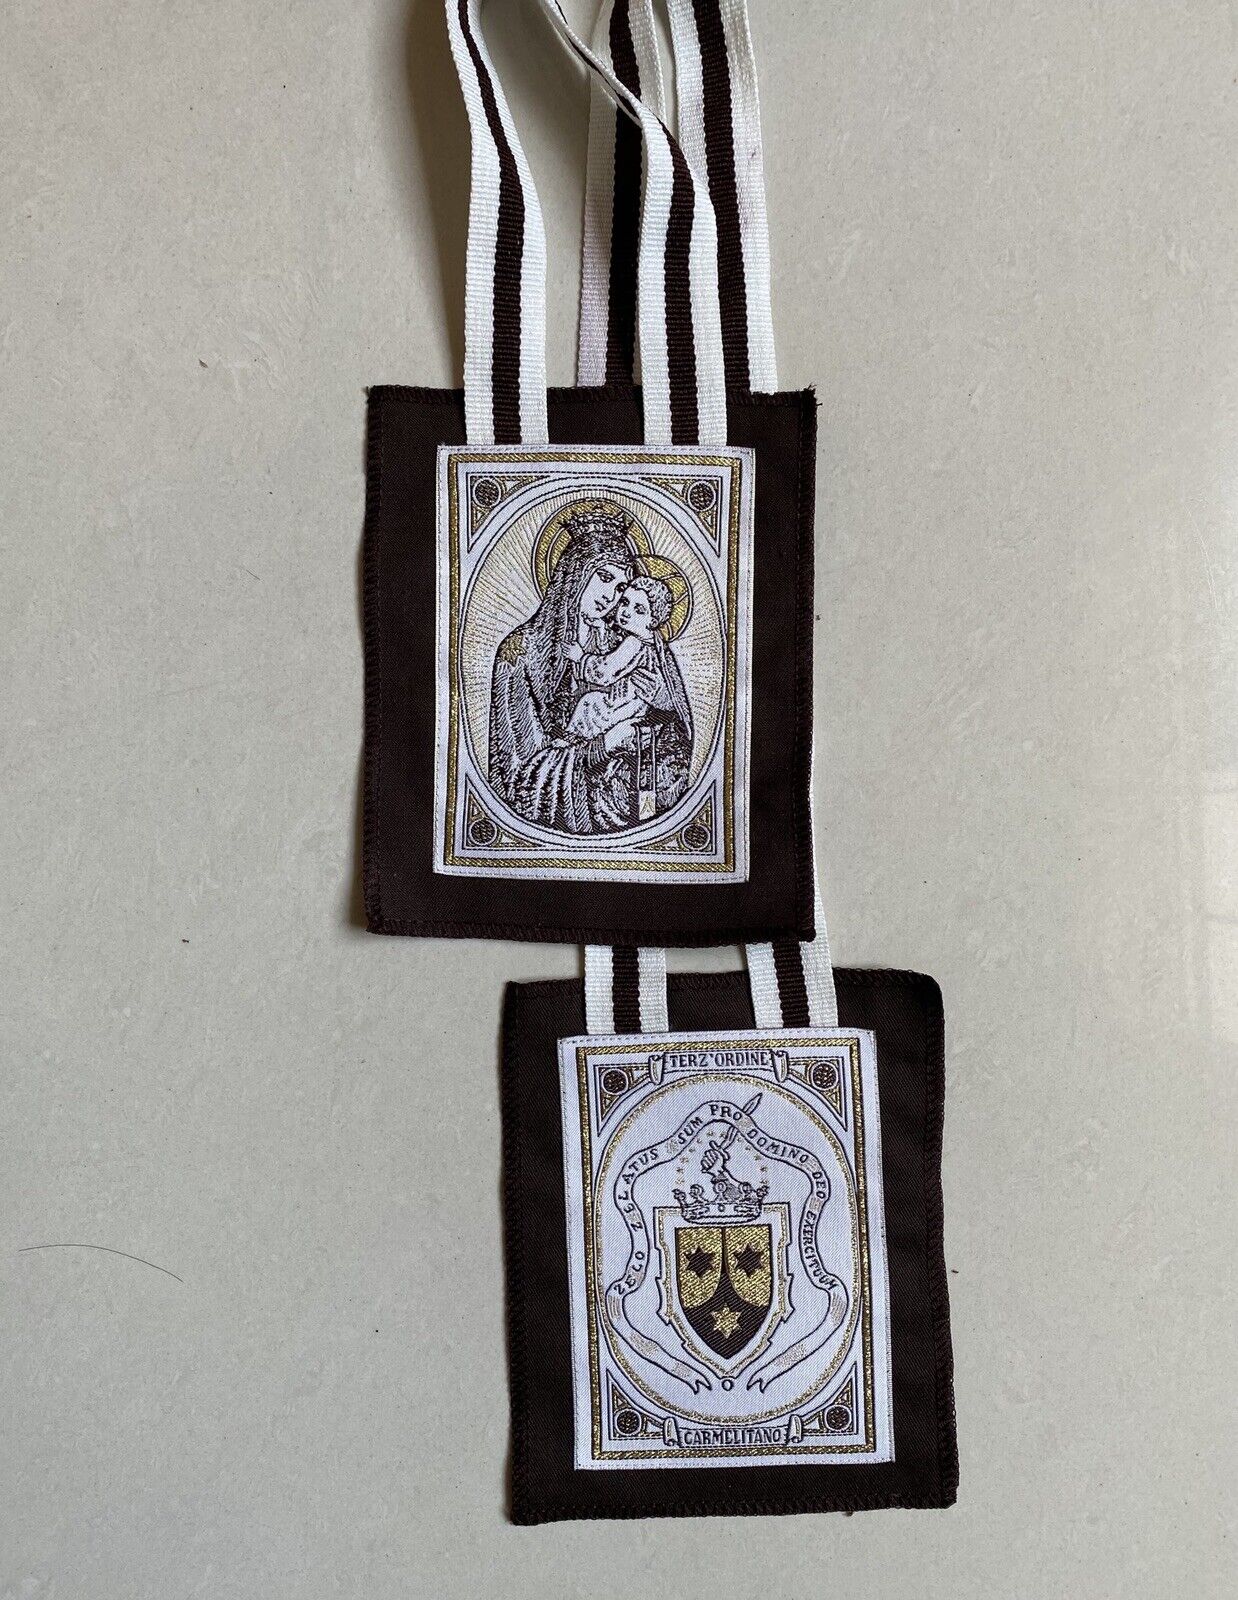 Big Scapulars of Our Lady of Mt. Carmel (traditional) Third Order 4.5x5.2inch